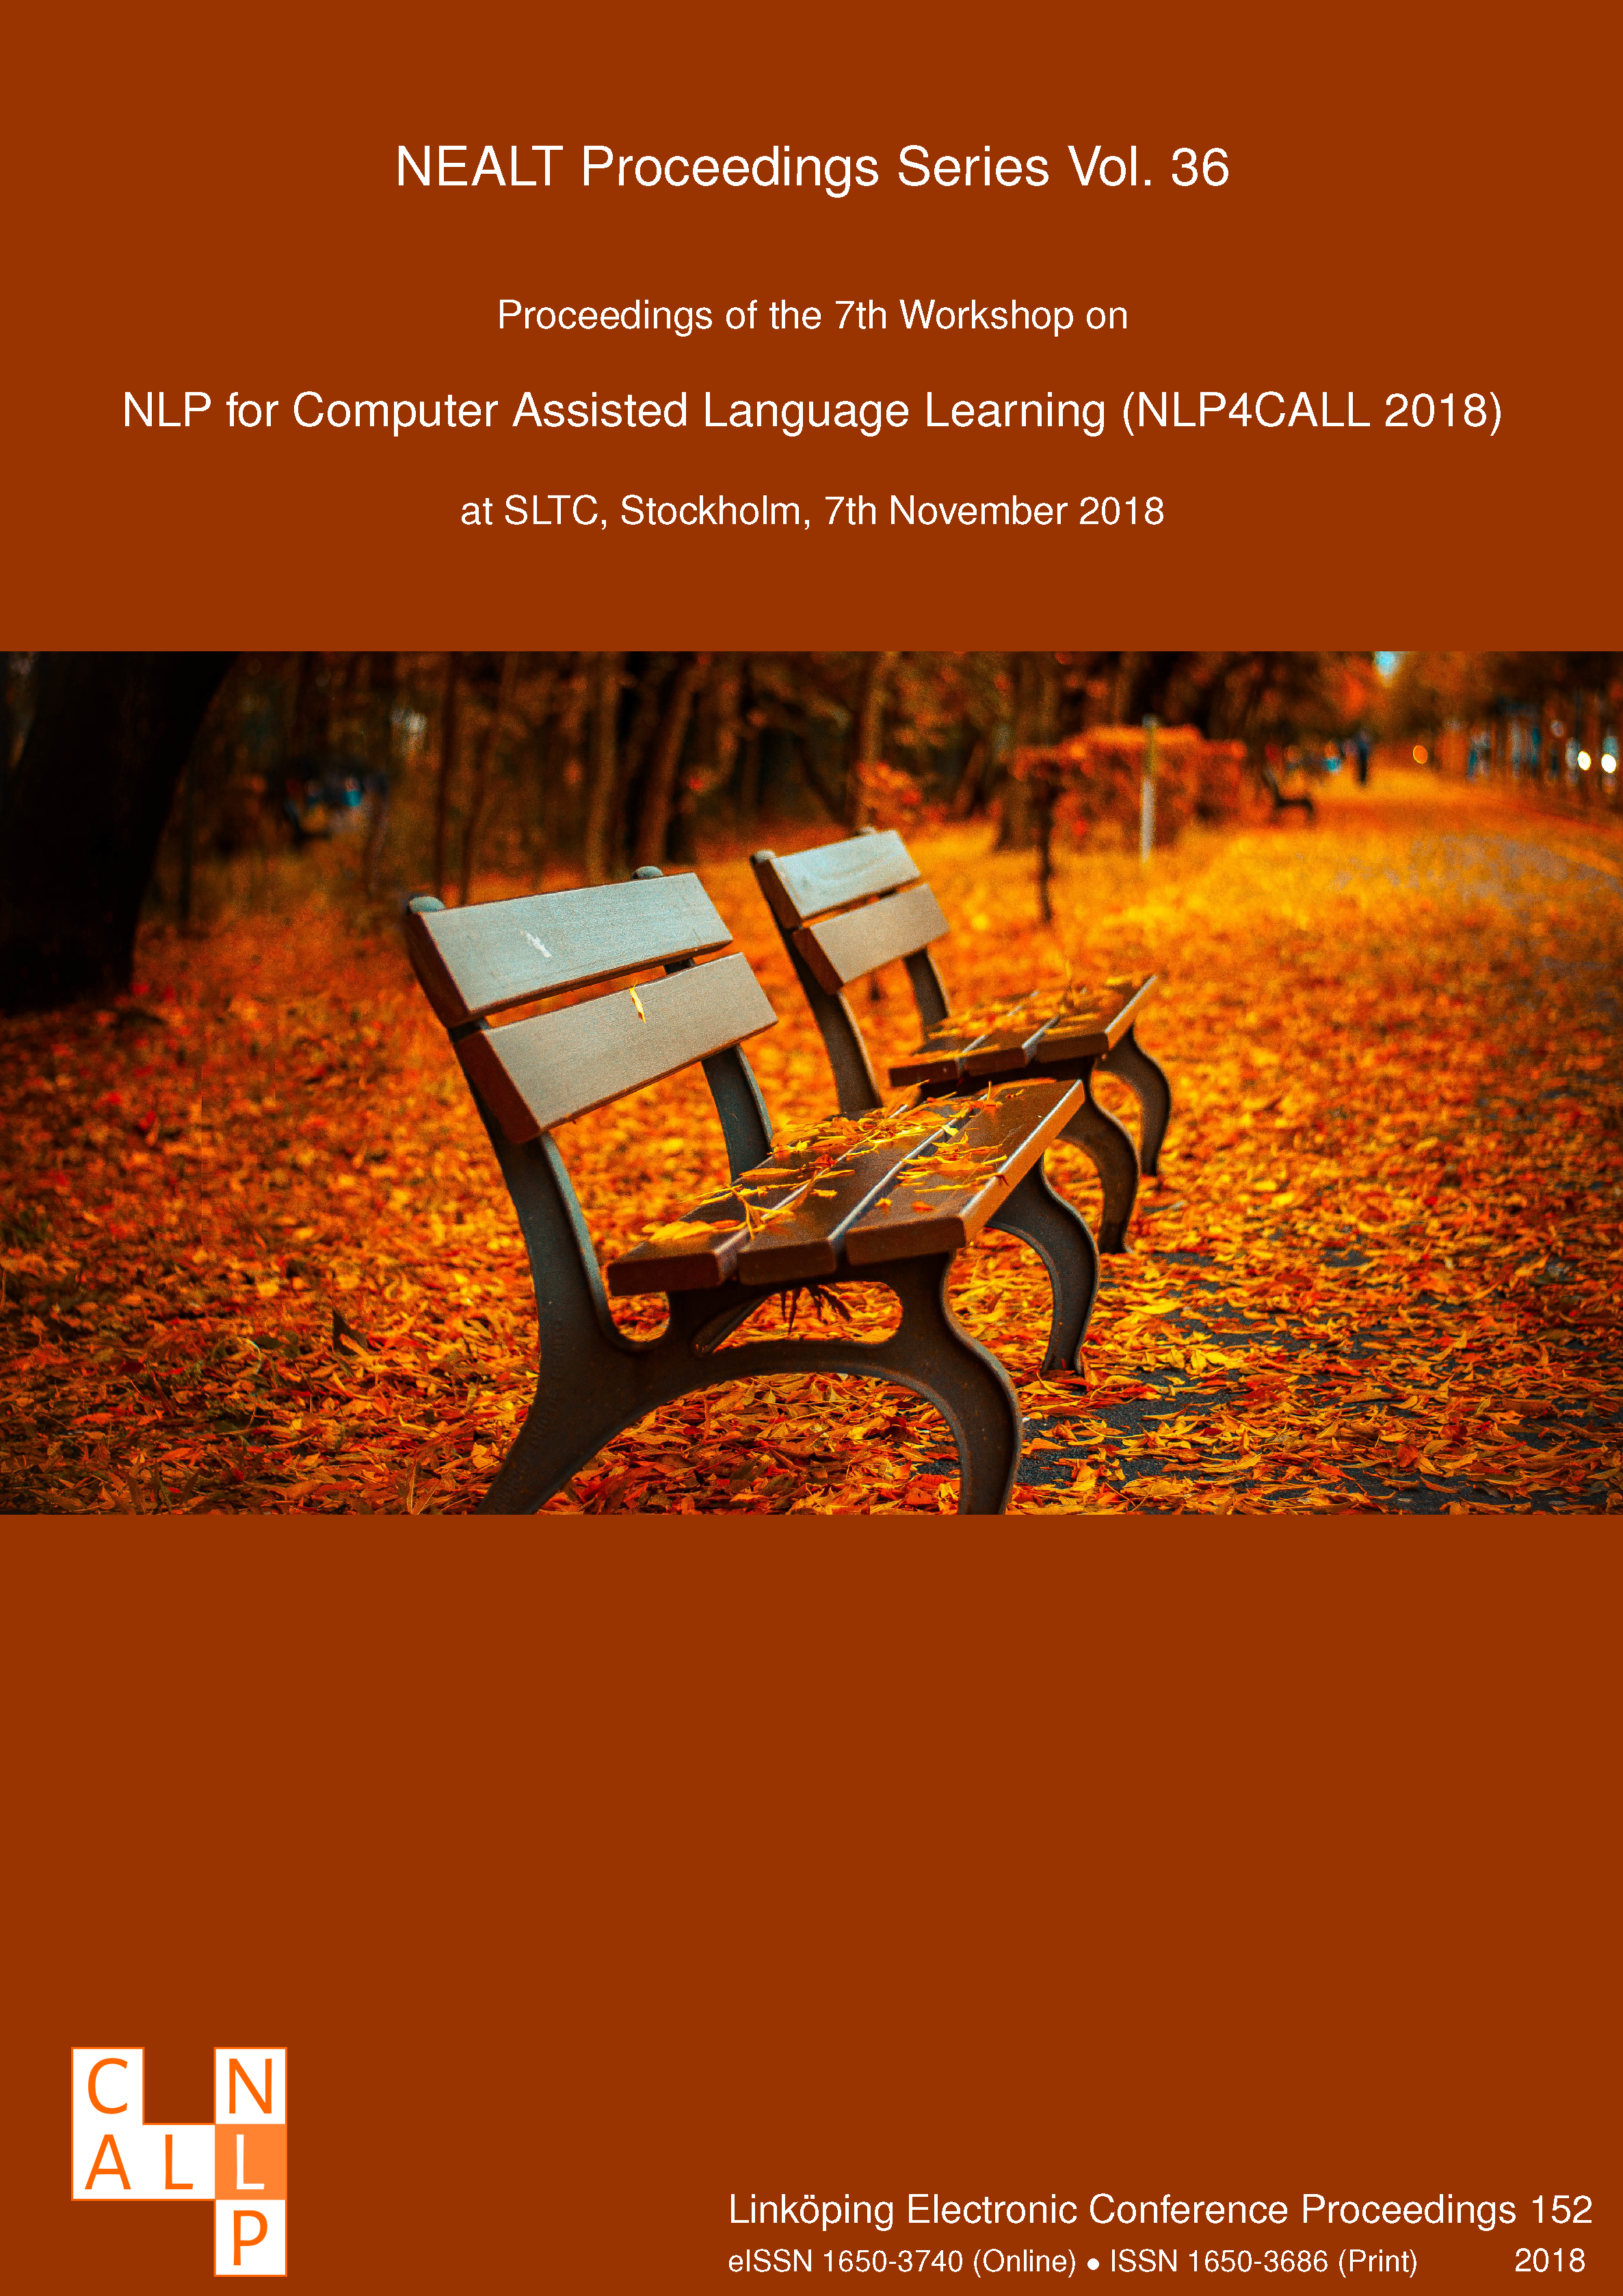 					View Proceedings of the 7th Workshop on NLP for Computer Assisted Language Learning (NLP4CALL 2018) at SLTC, Stockholm, 7th November 2018
				